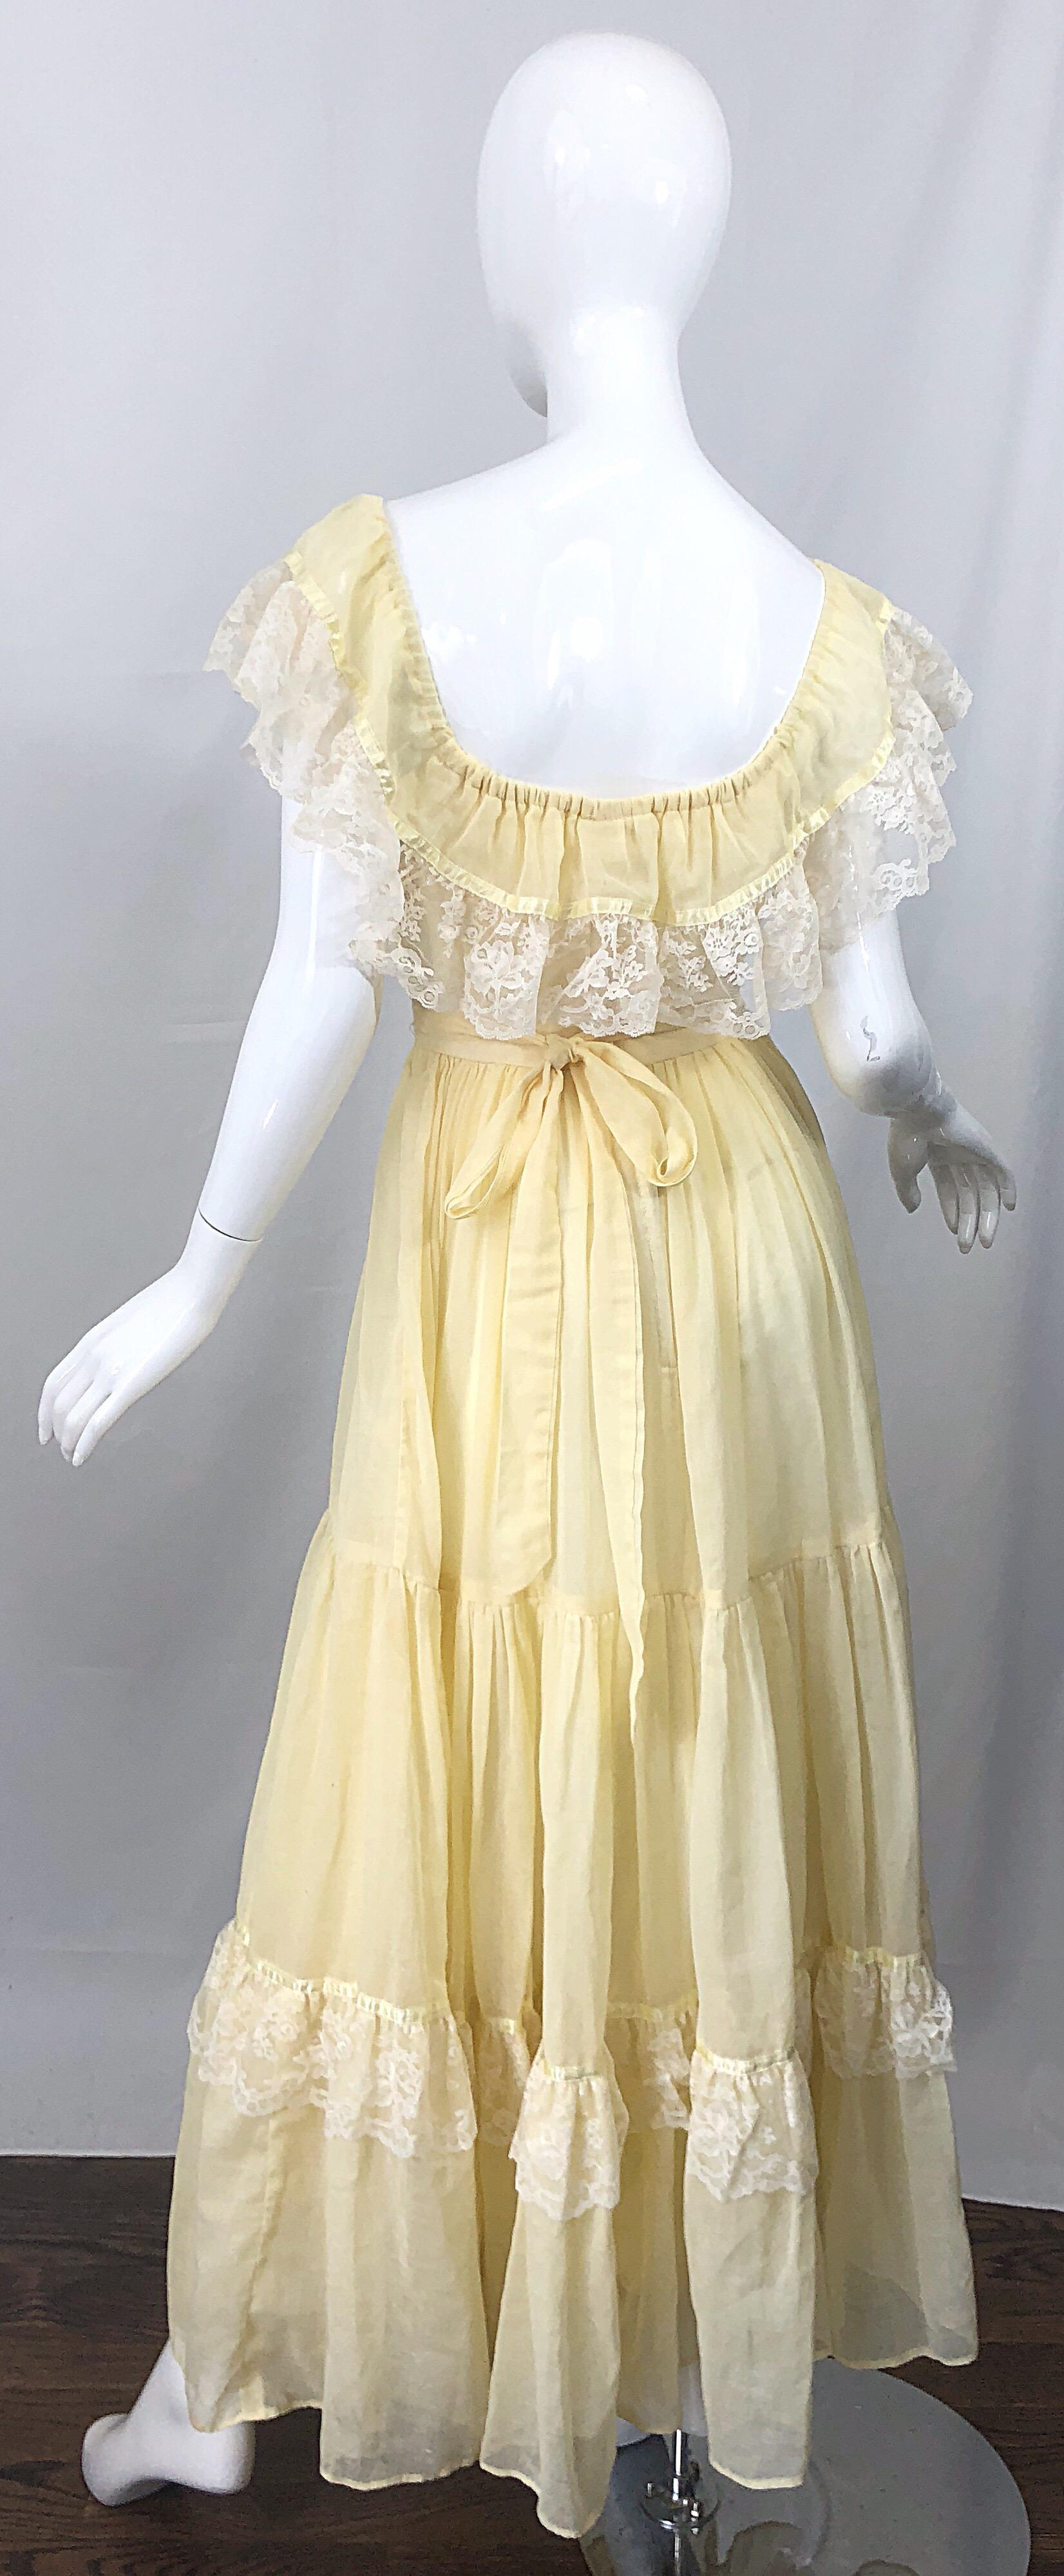 1970s Pale Light Yellow Cotton Voile + Lace Vintage Boho 70s Maxi Dress In Excellent Condition For Sale In San Diego, CA